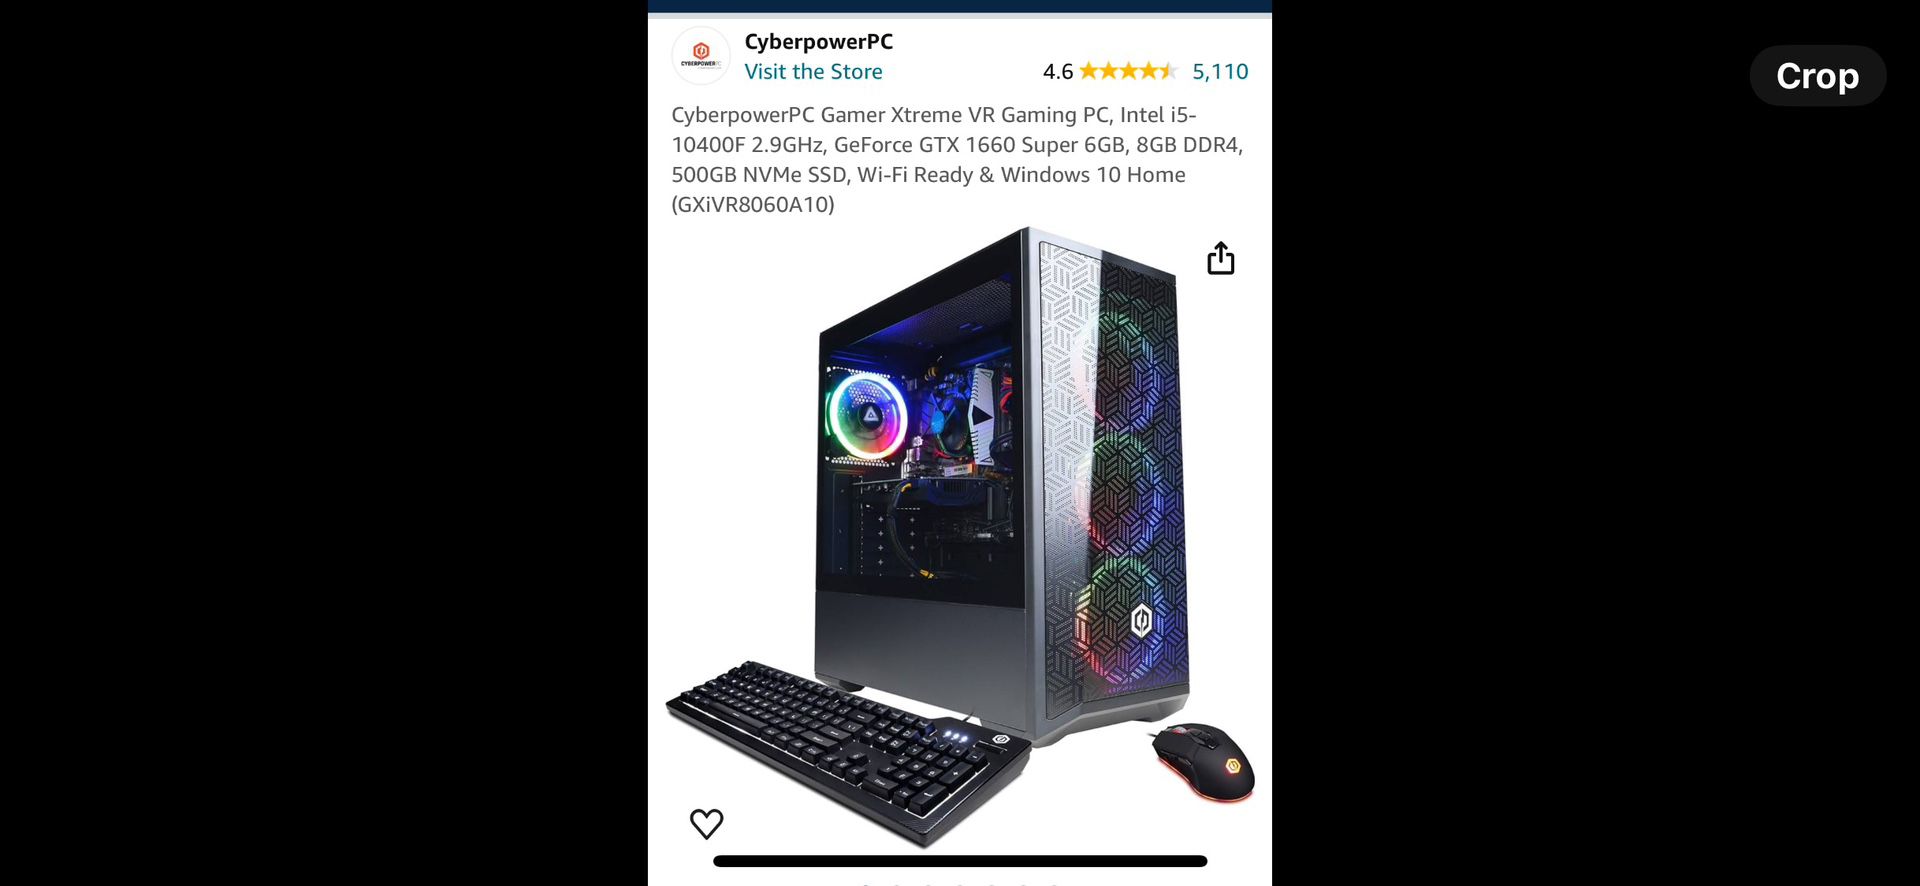 CyperPower PC Xtreme VR Gaming PC